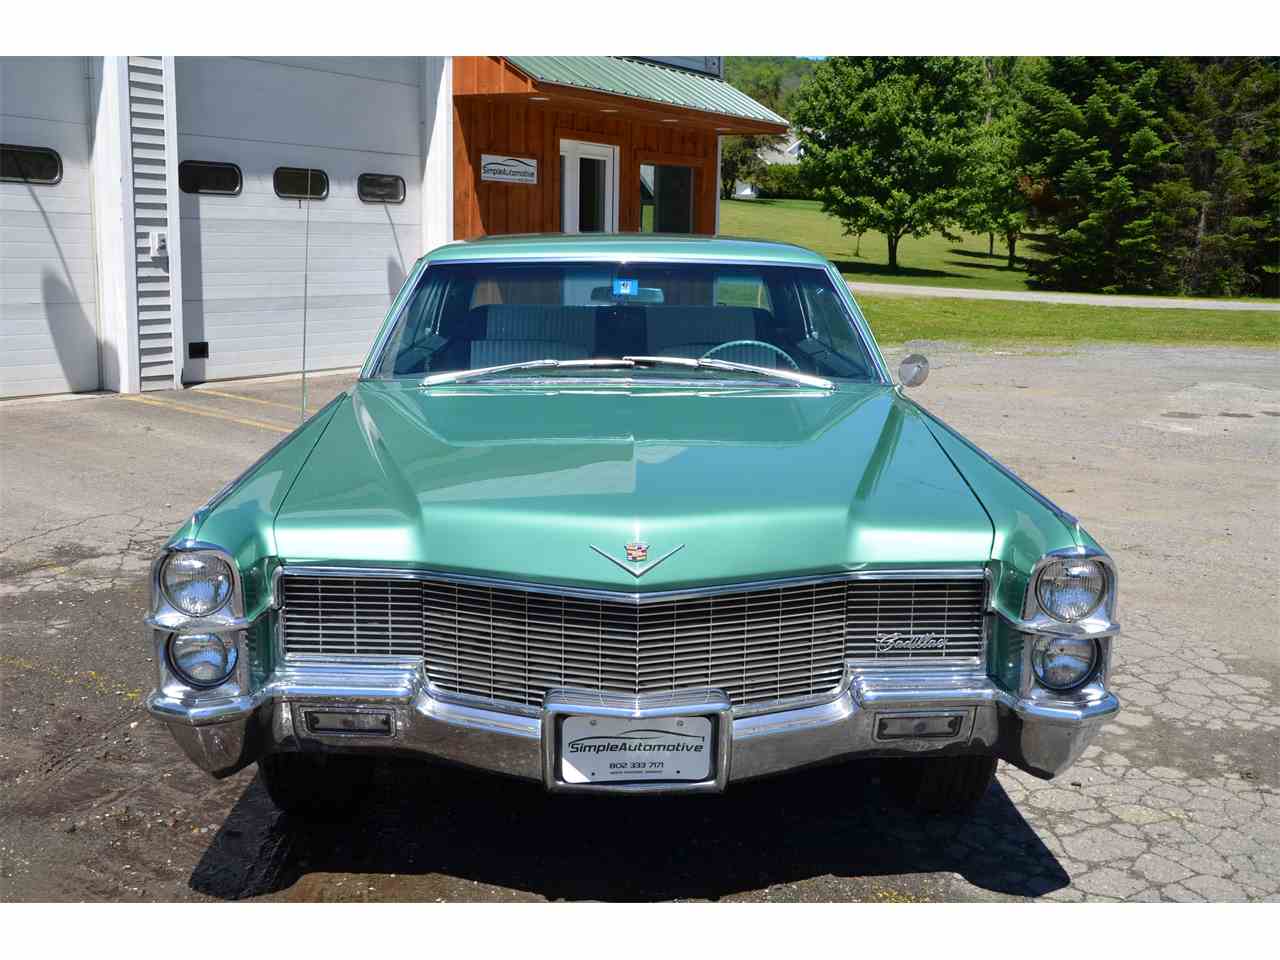 1965 Cadillac Coupe Deville For Sale Classiccars Cc 994639 focus for Classic Cars Vermont